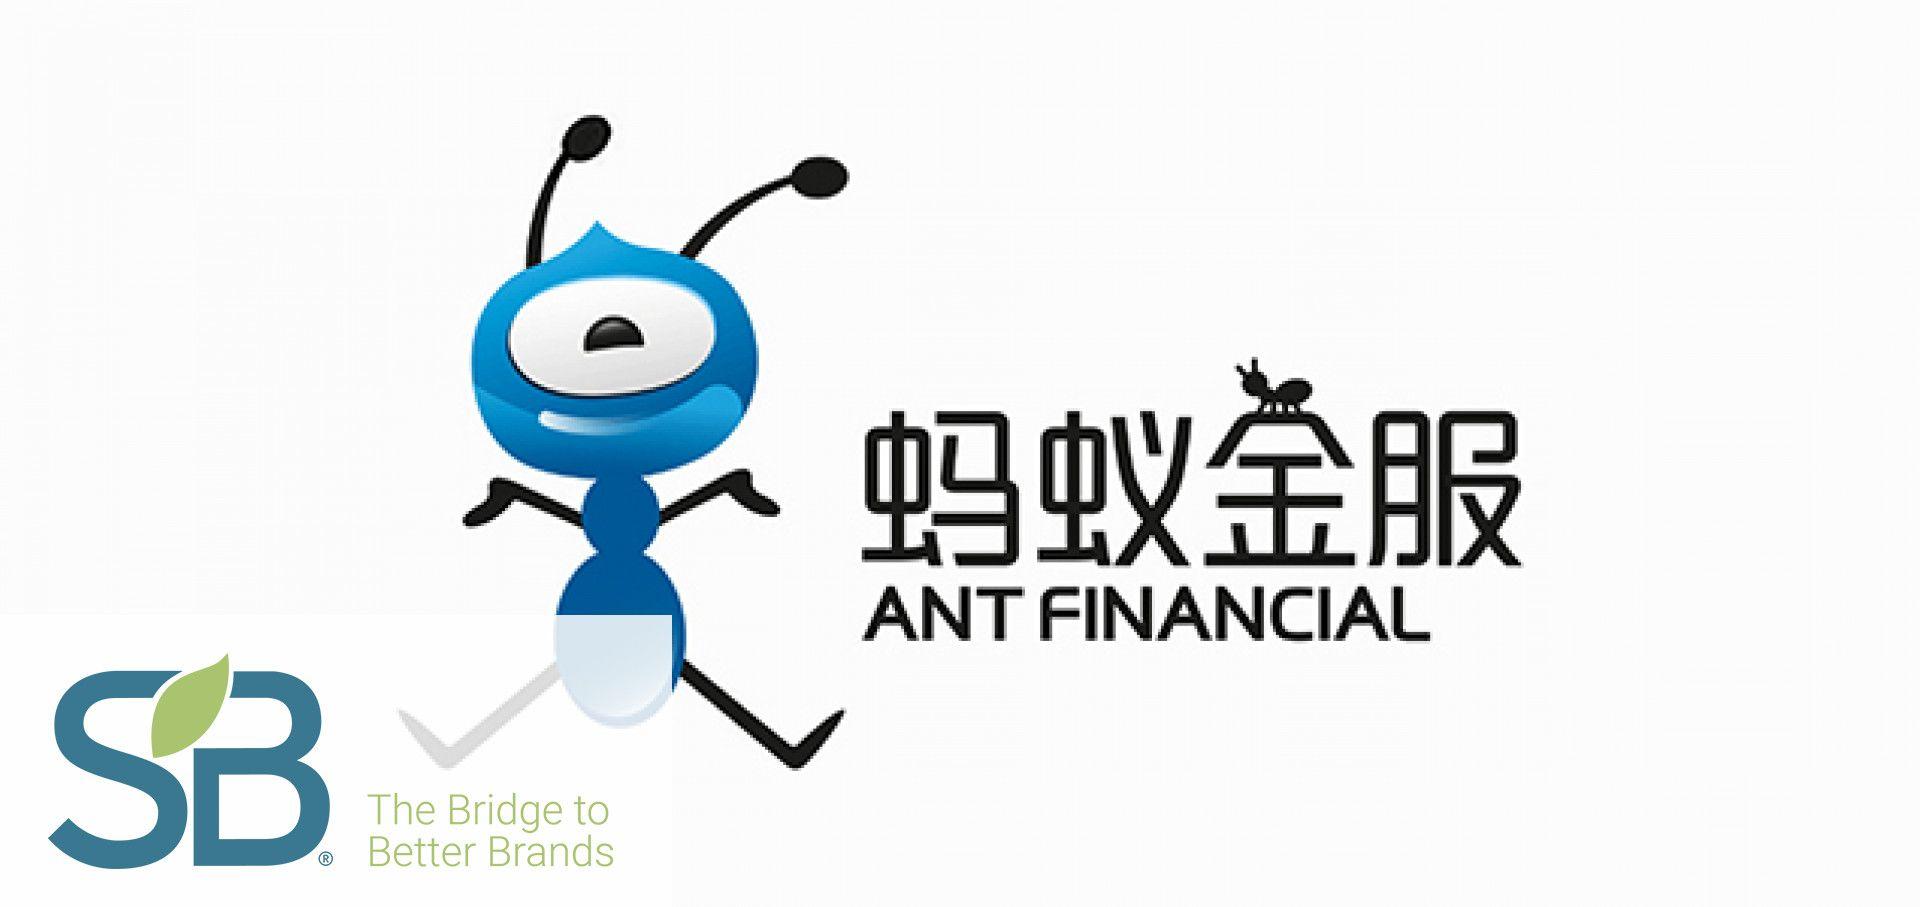 Ant Financial Logo - Ant Financial Harnesses Blockchain Technology to Finance Solutions ...